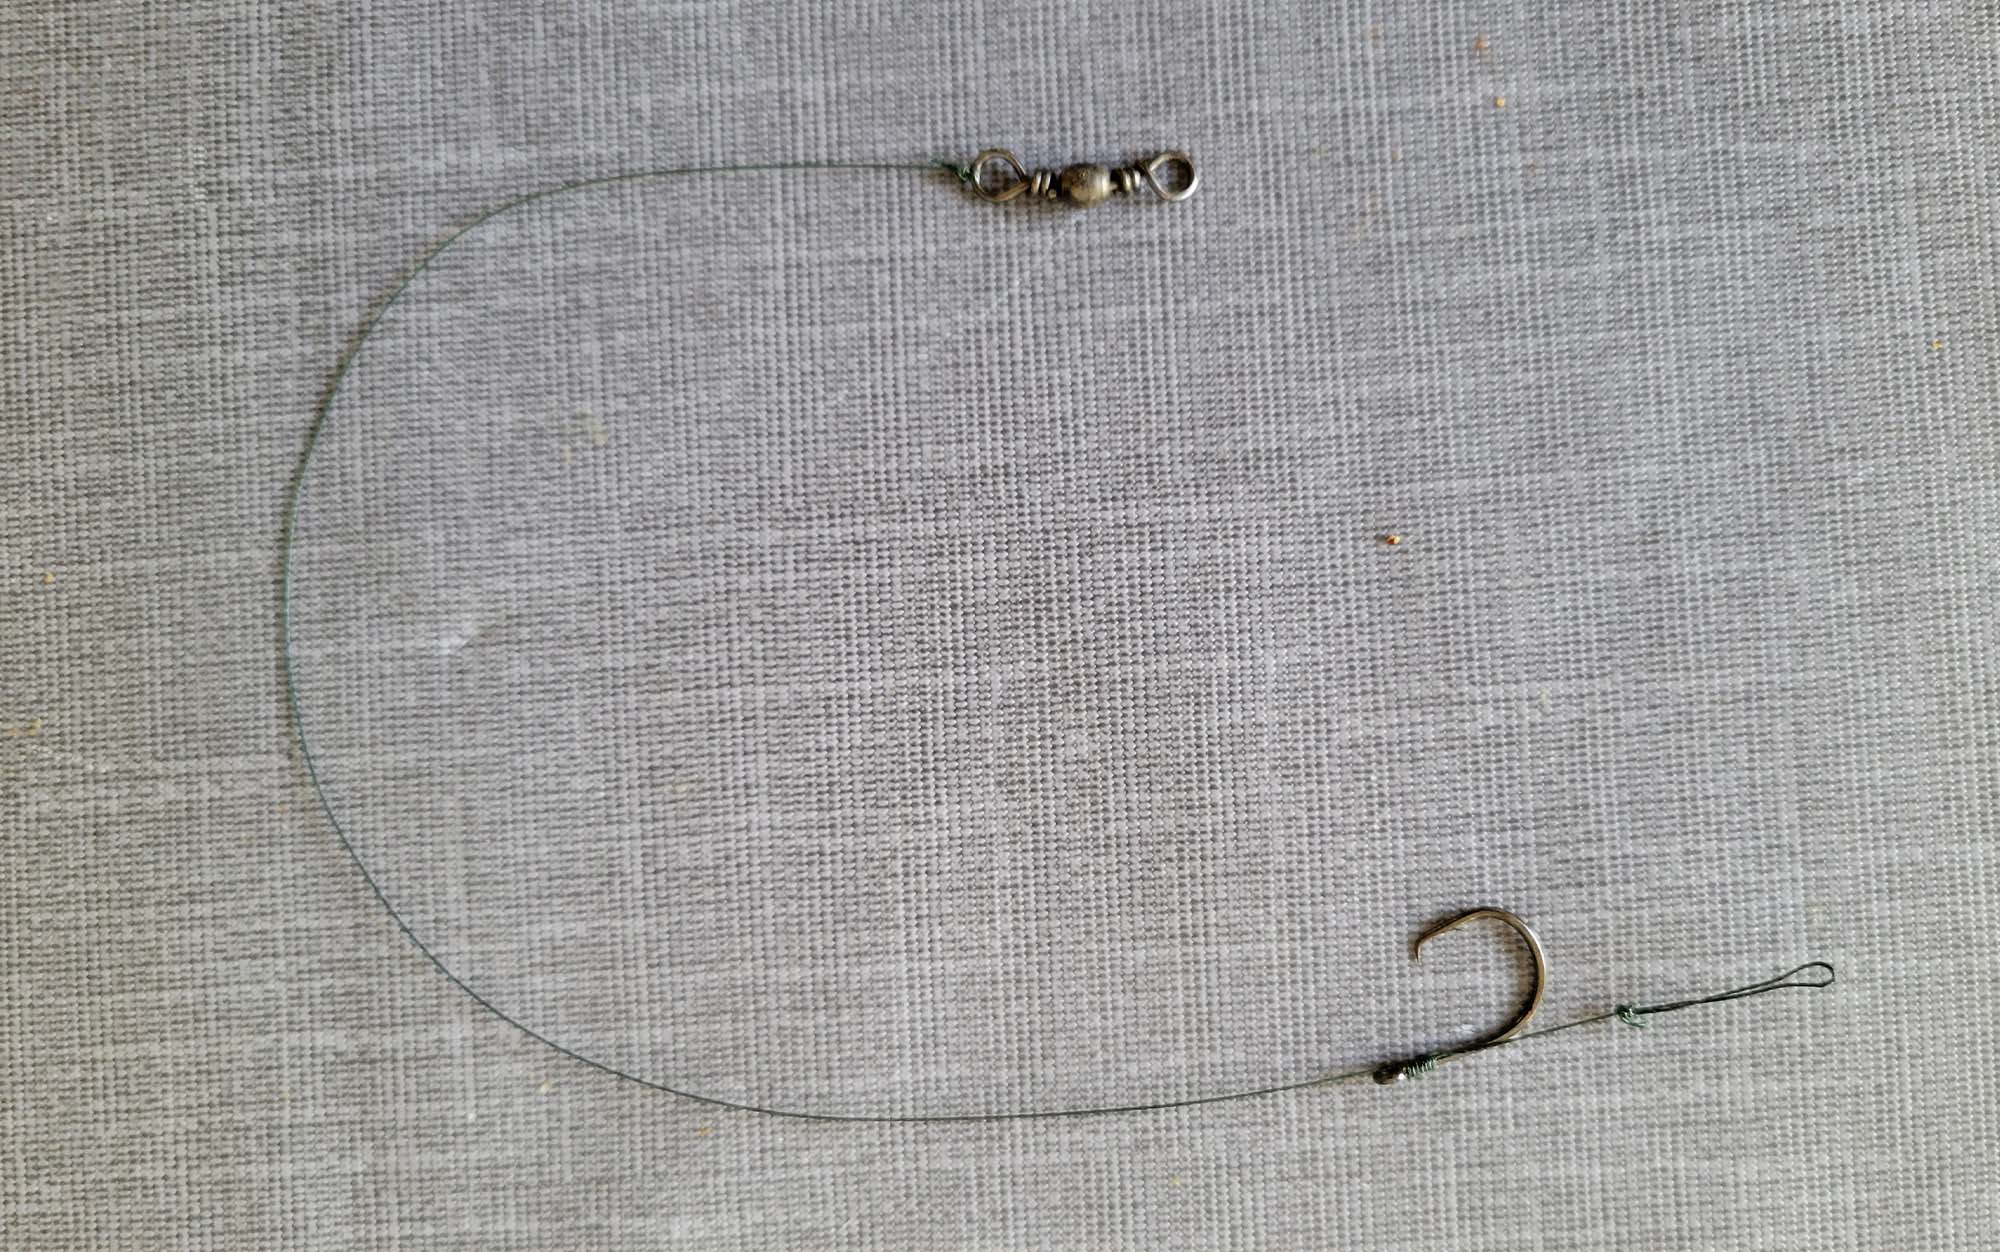 The hair rig is critical to fooling them long enough for the hook to find purchase in the fishâ€™s rubbery mouth.